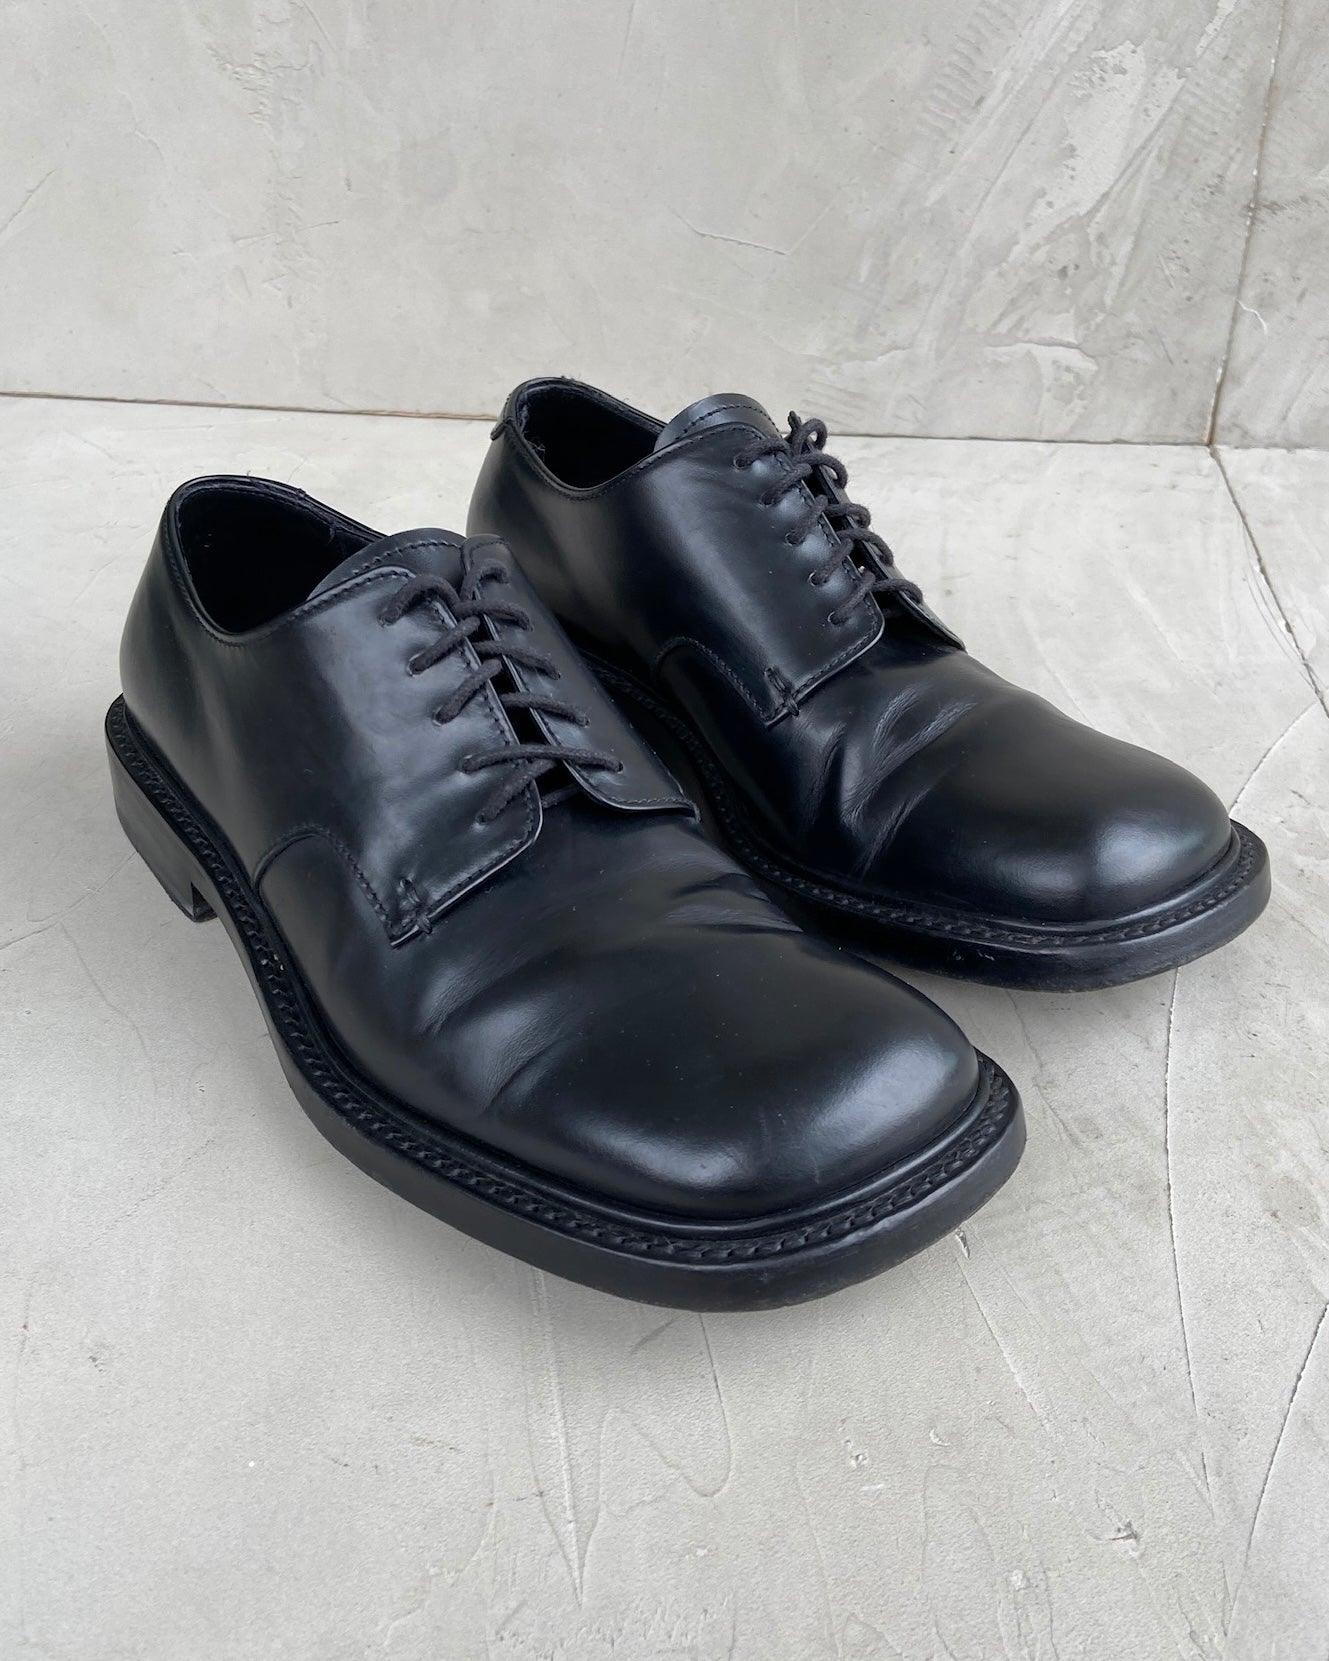 PRADA FW1999 SQUARE TOE LEATHER DERBY SHOES - EU 41 / UK 7.5 - Known Source